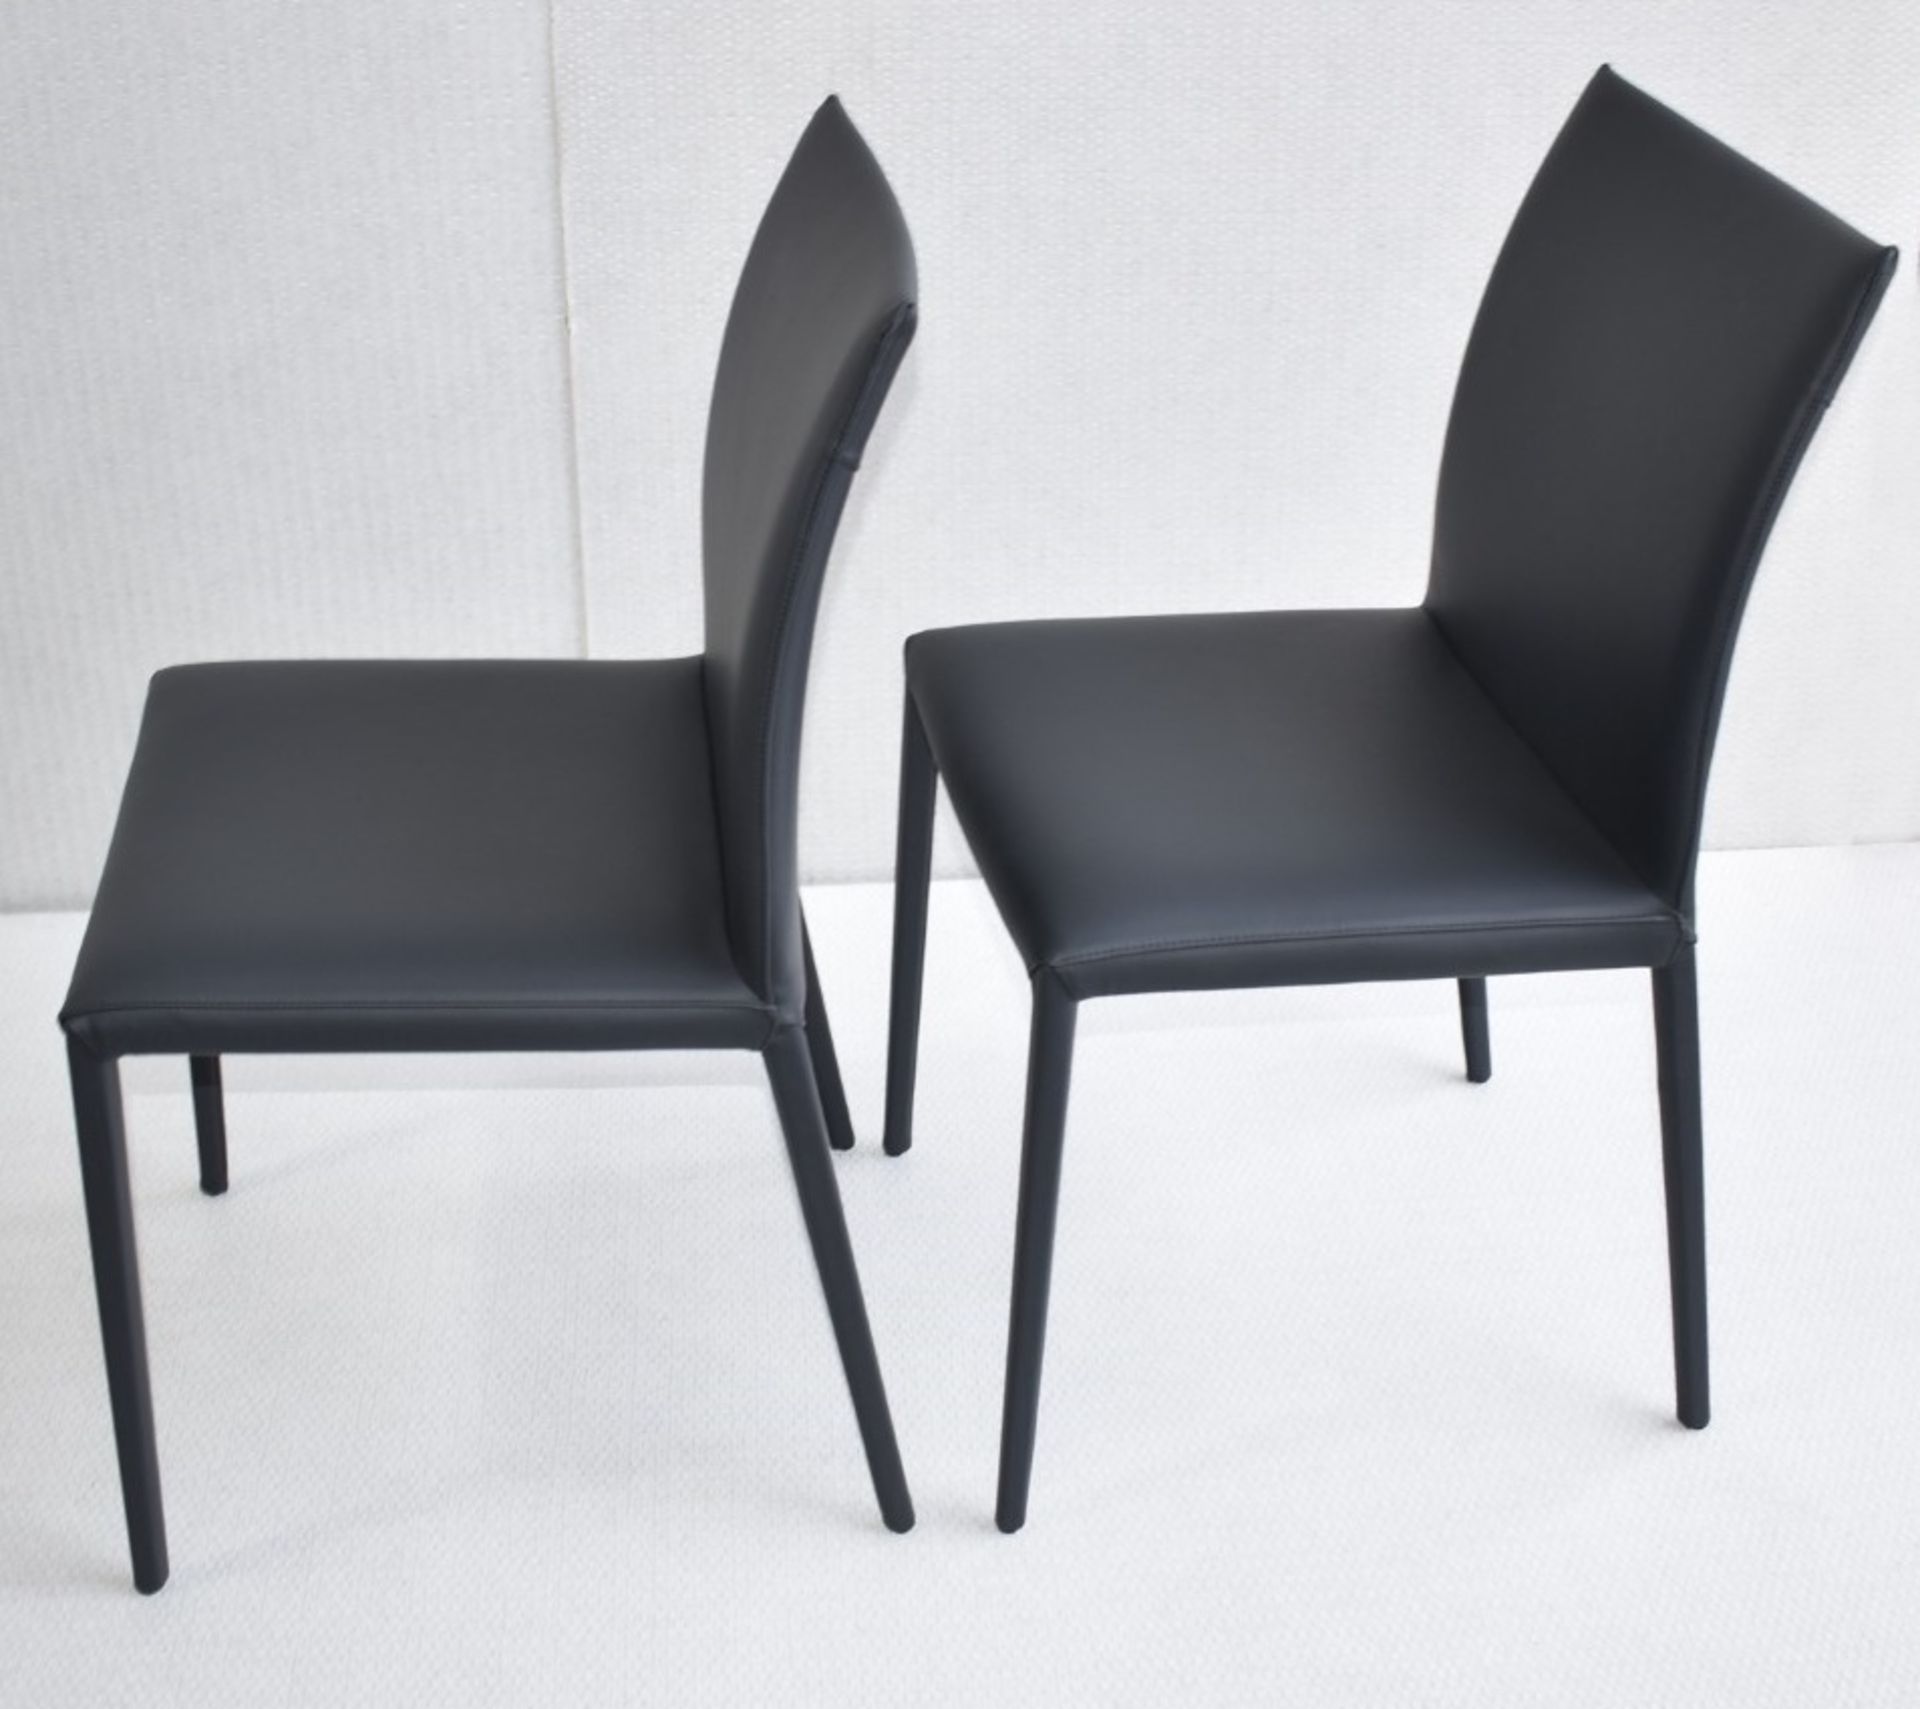 Pair of CATTELAN ITALIA Norma Designer Leather Upholstered Dining Chairs - Original Price £1,258 - Image 3 of 5